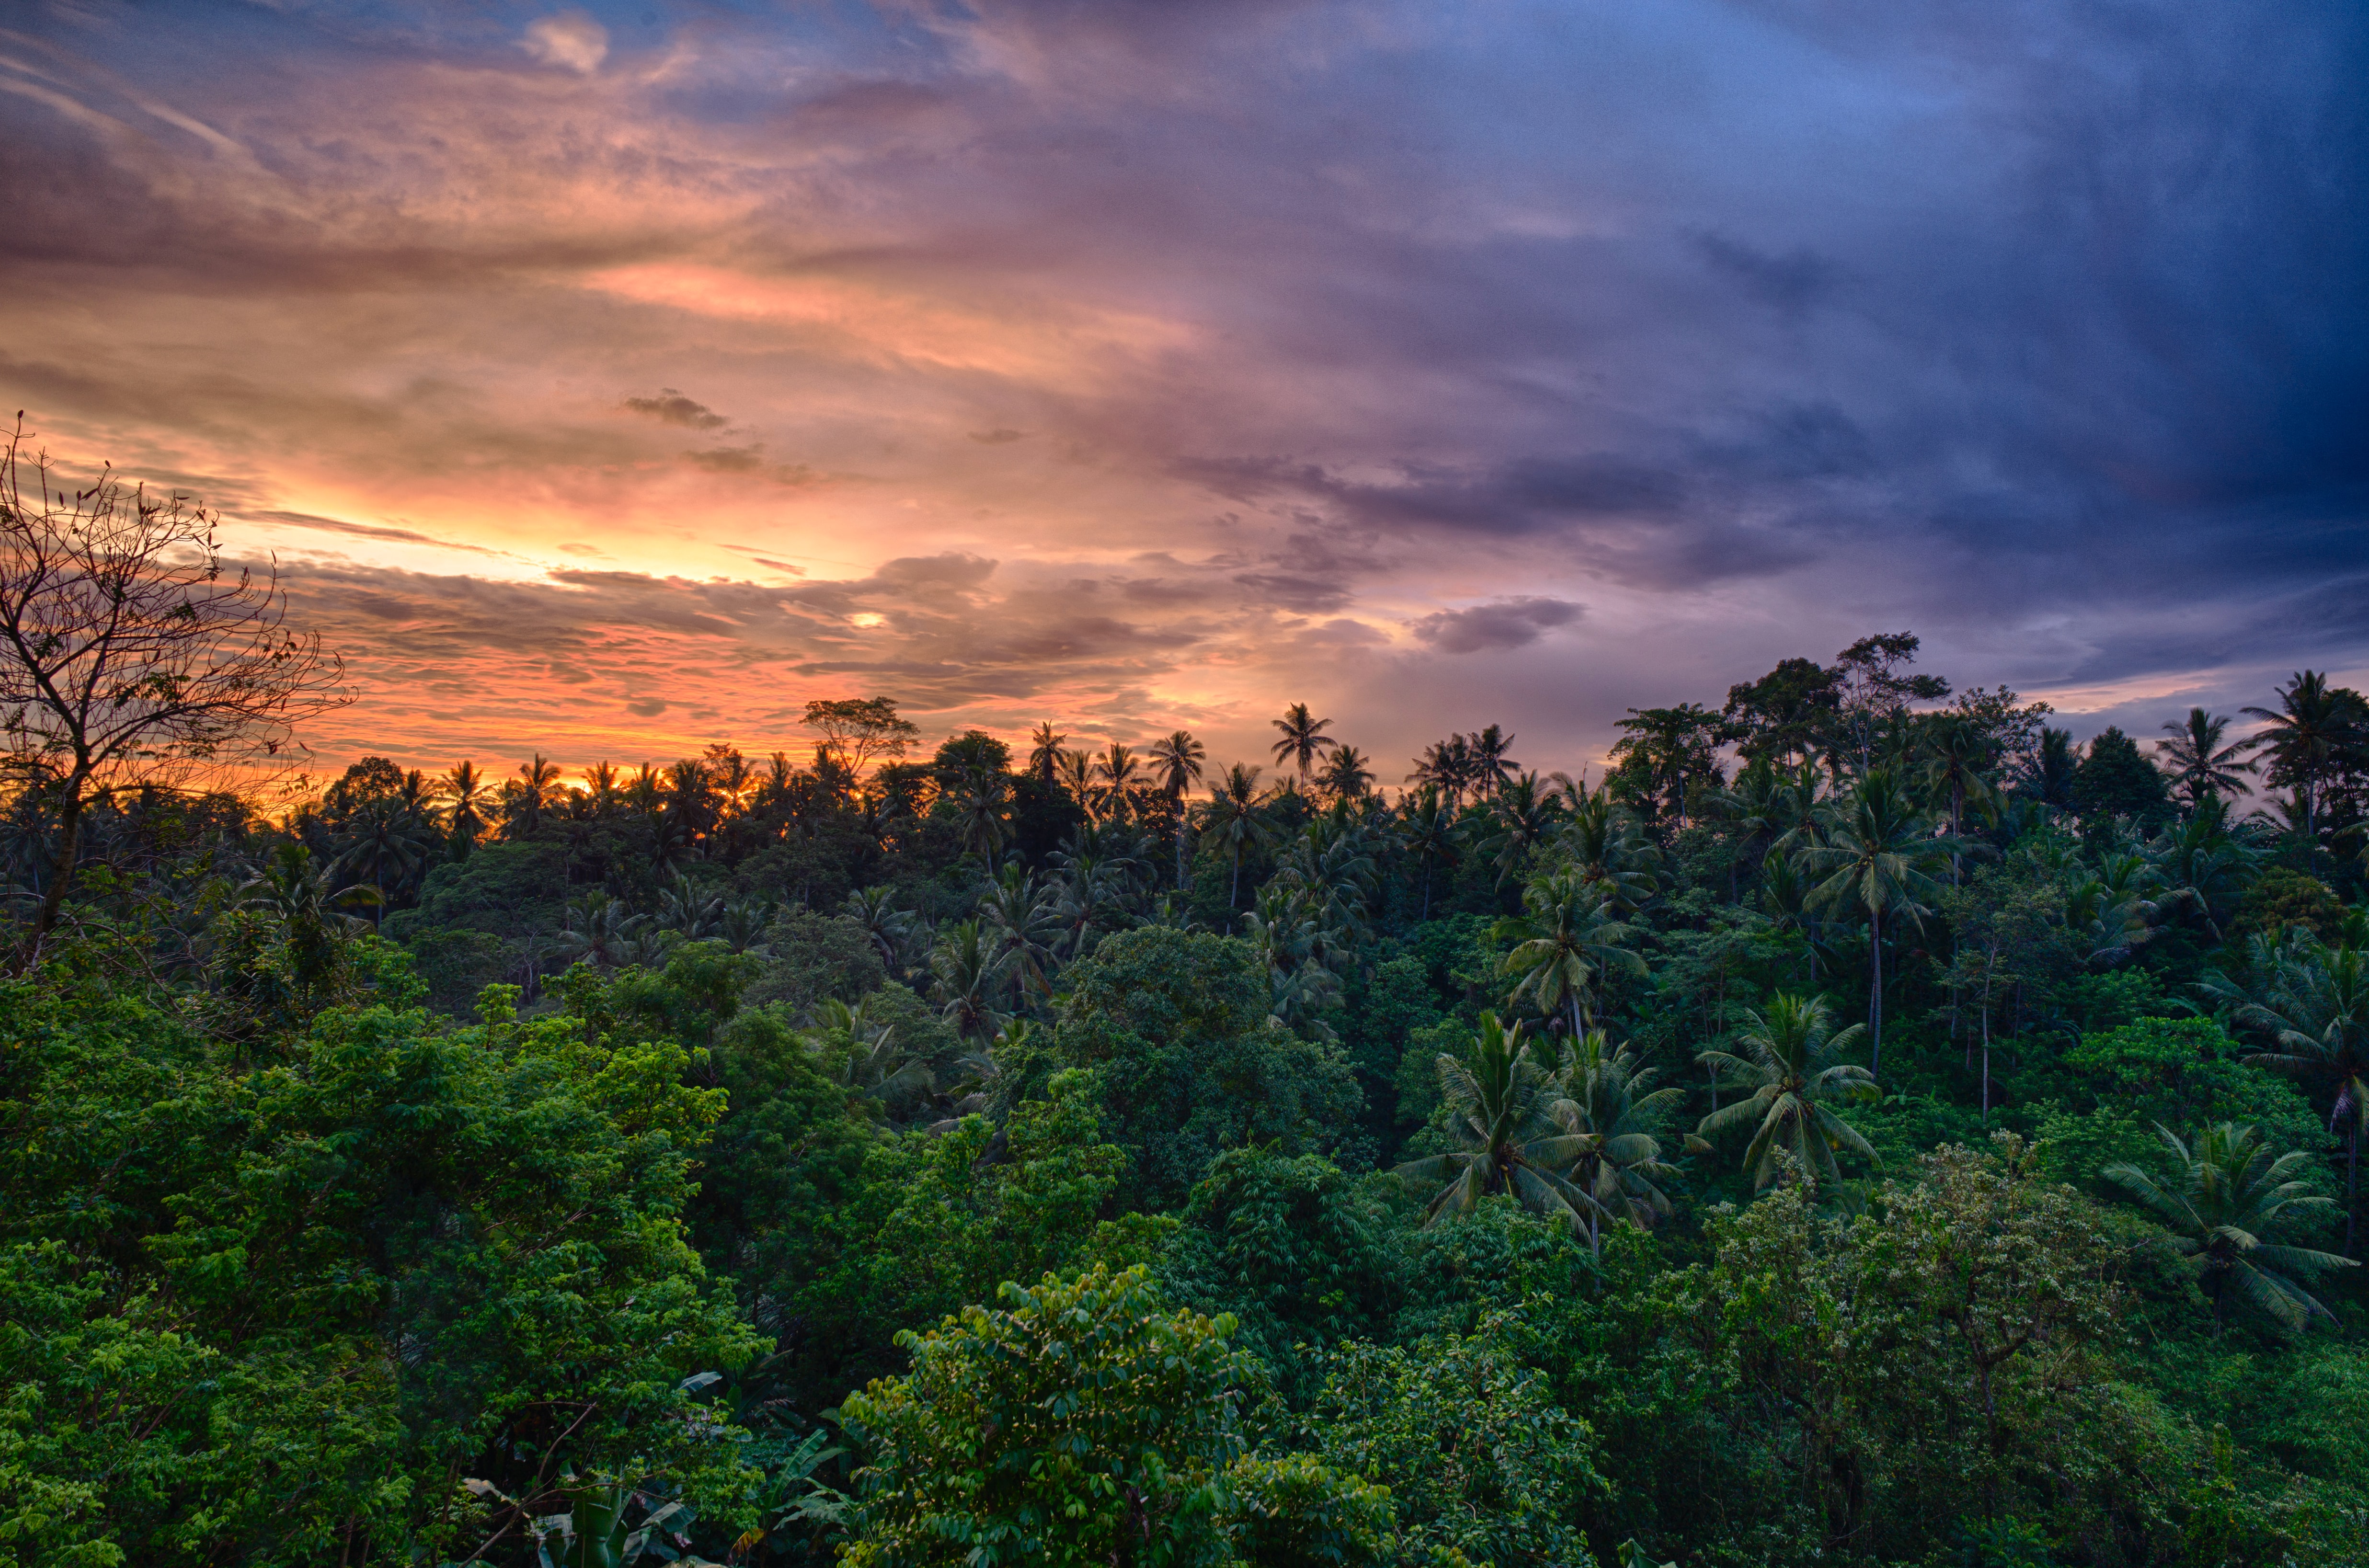 a colorful sunset over a lush, tropical forest in Indonesia